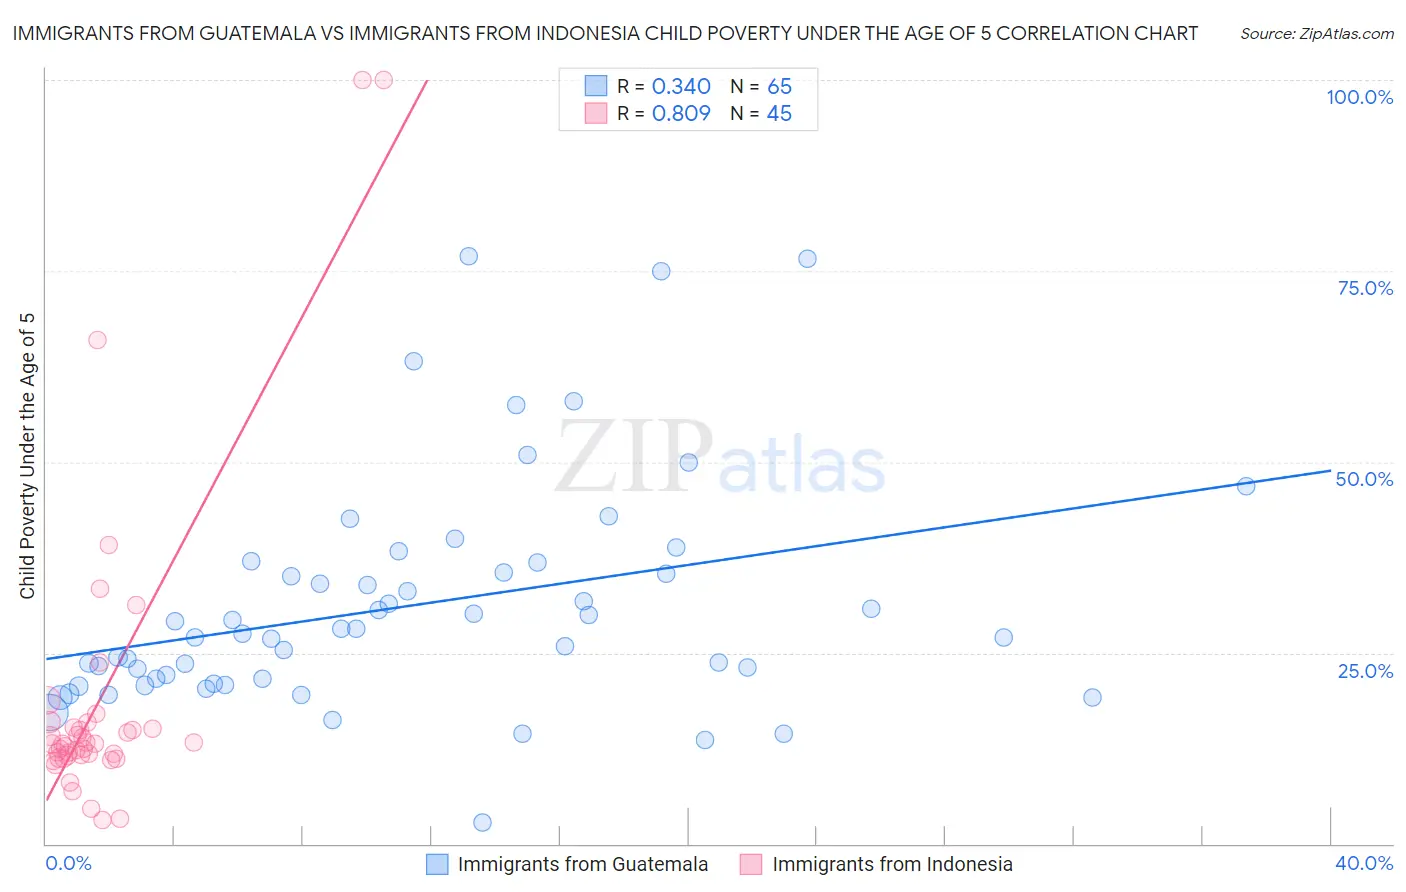 Immigrants from Guatemala vs Immigrants from Indonesia Child Poverty Under the Age of 5